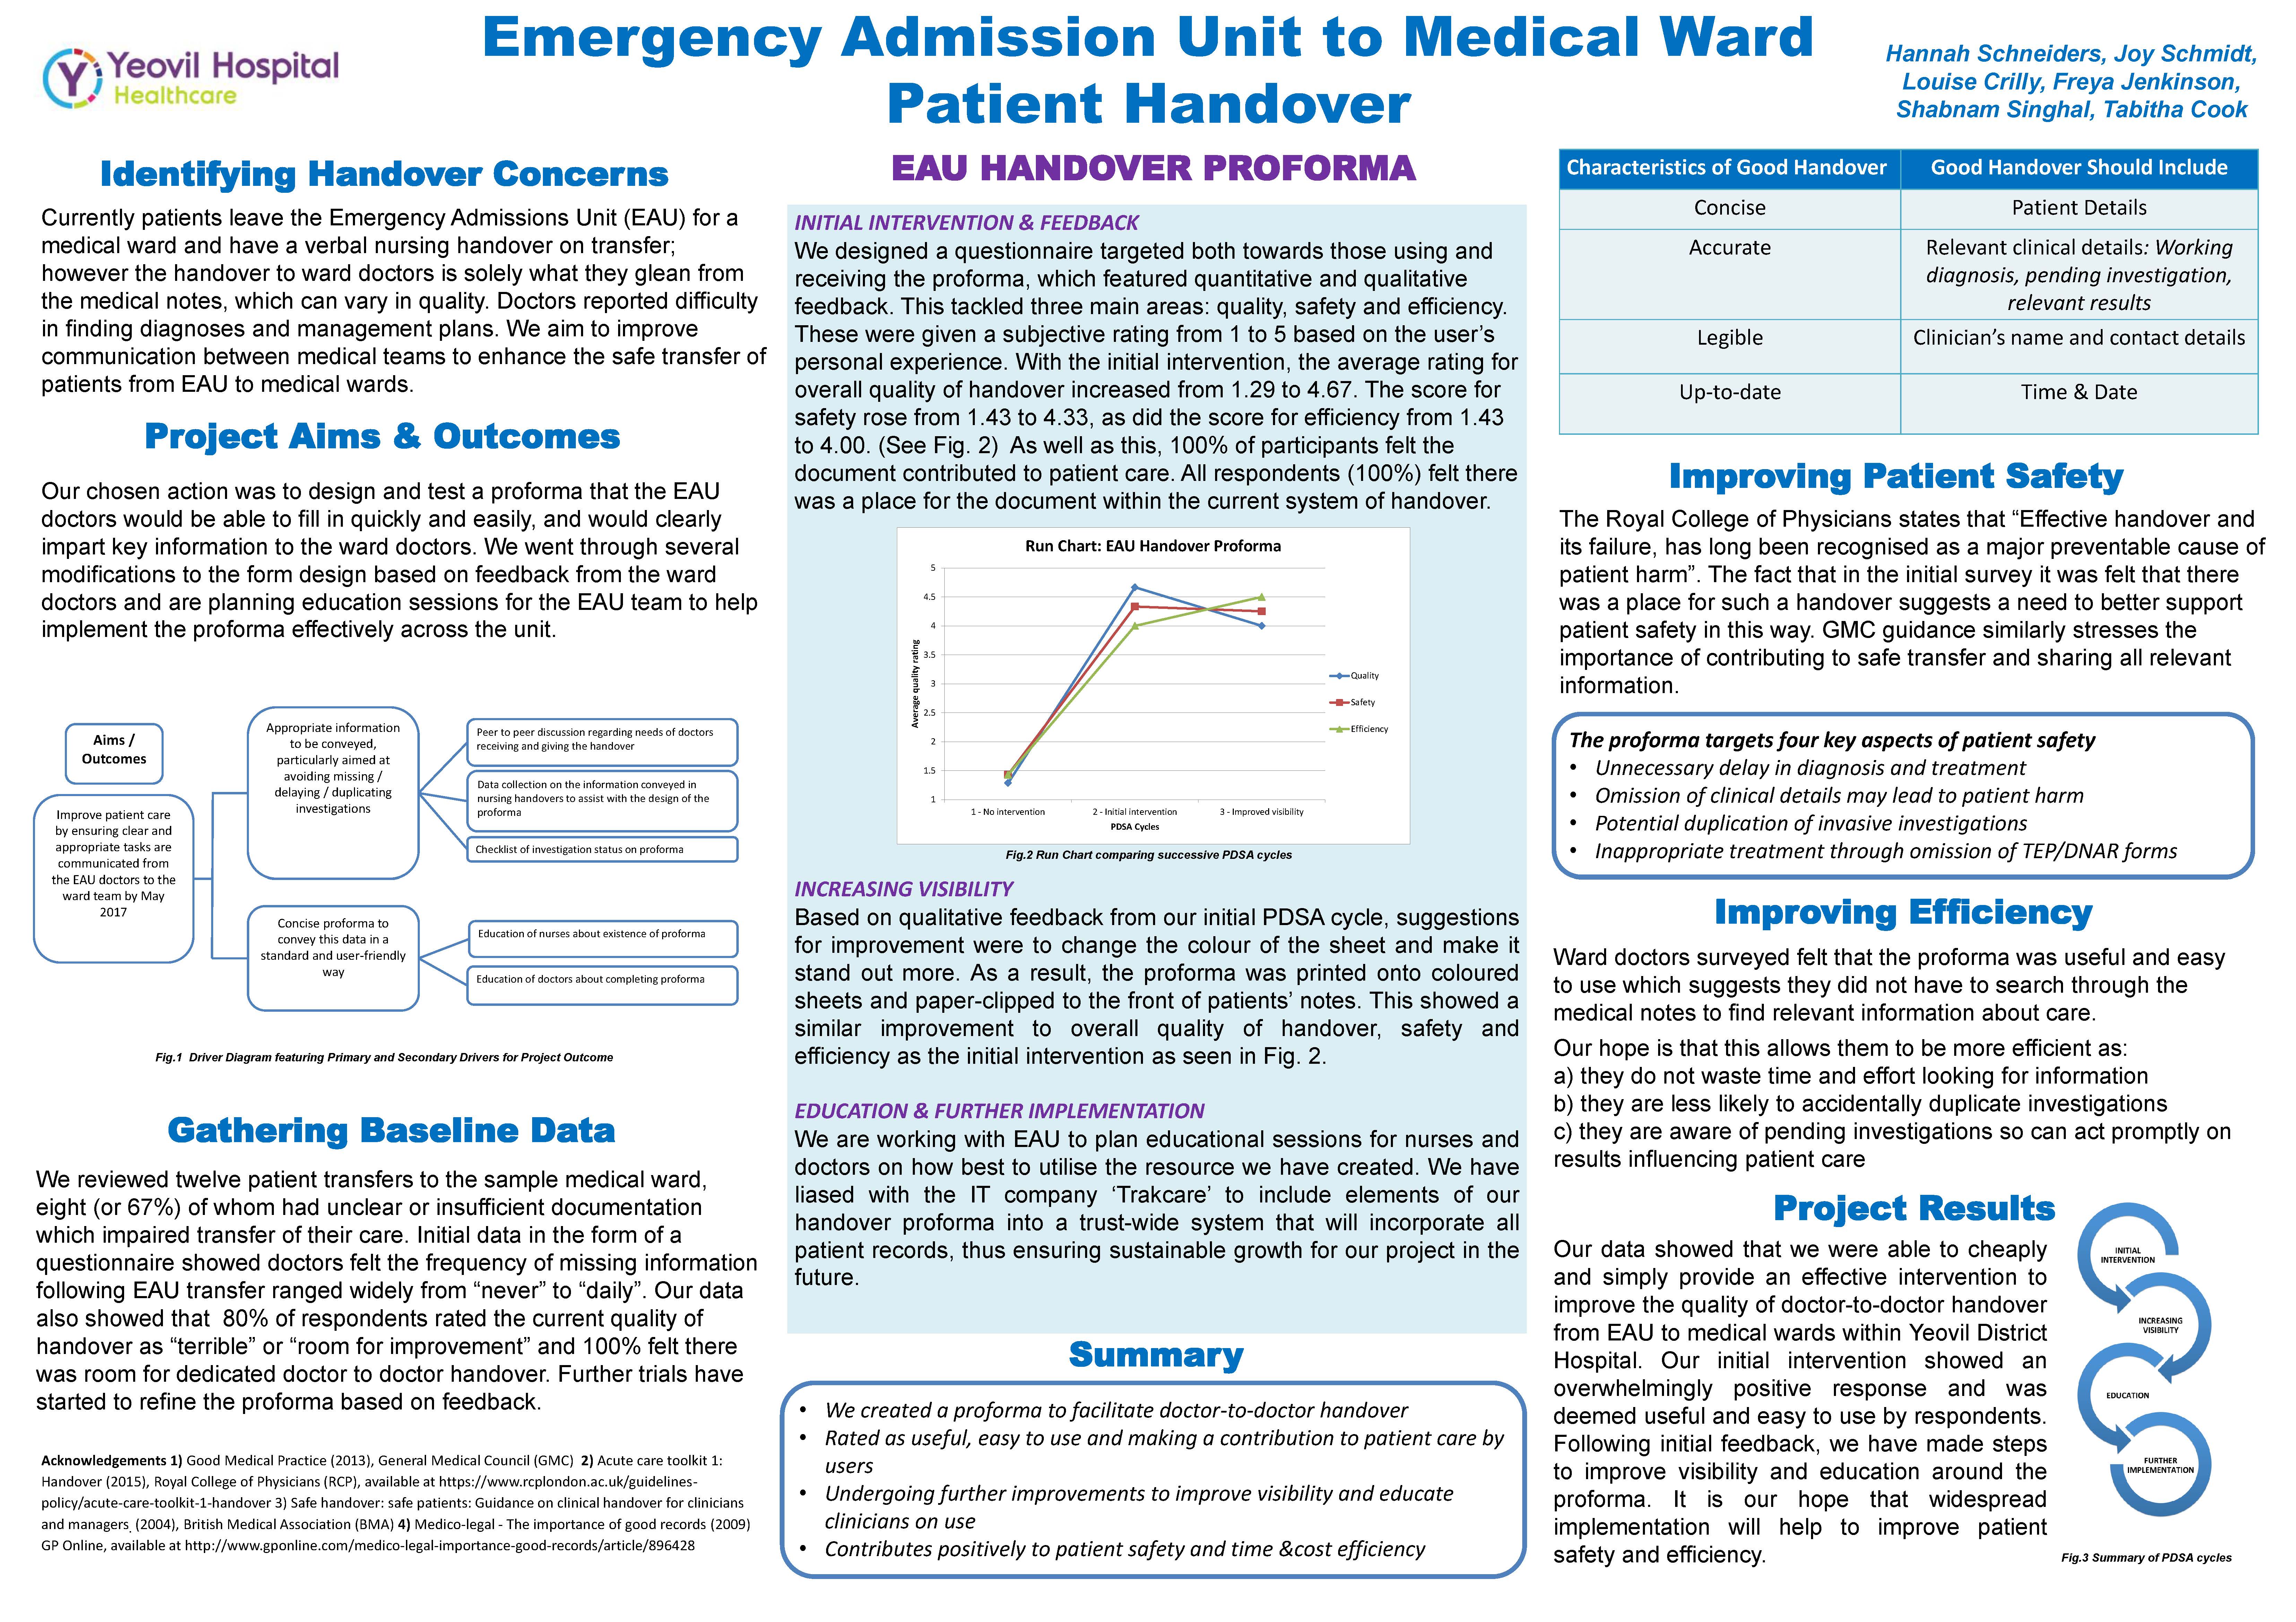 Improving Handover from Emergency Admissions Unit (EAU) to Ward - Quality Improvement Project at Yeovil Hospital featured image